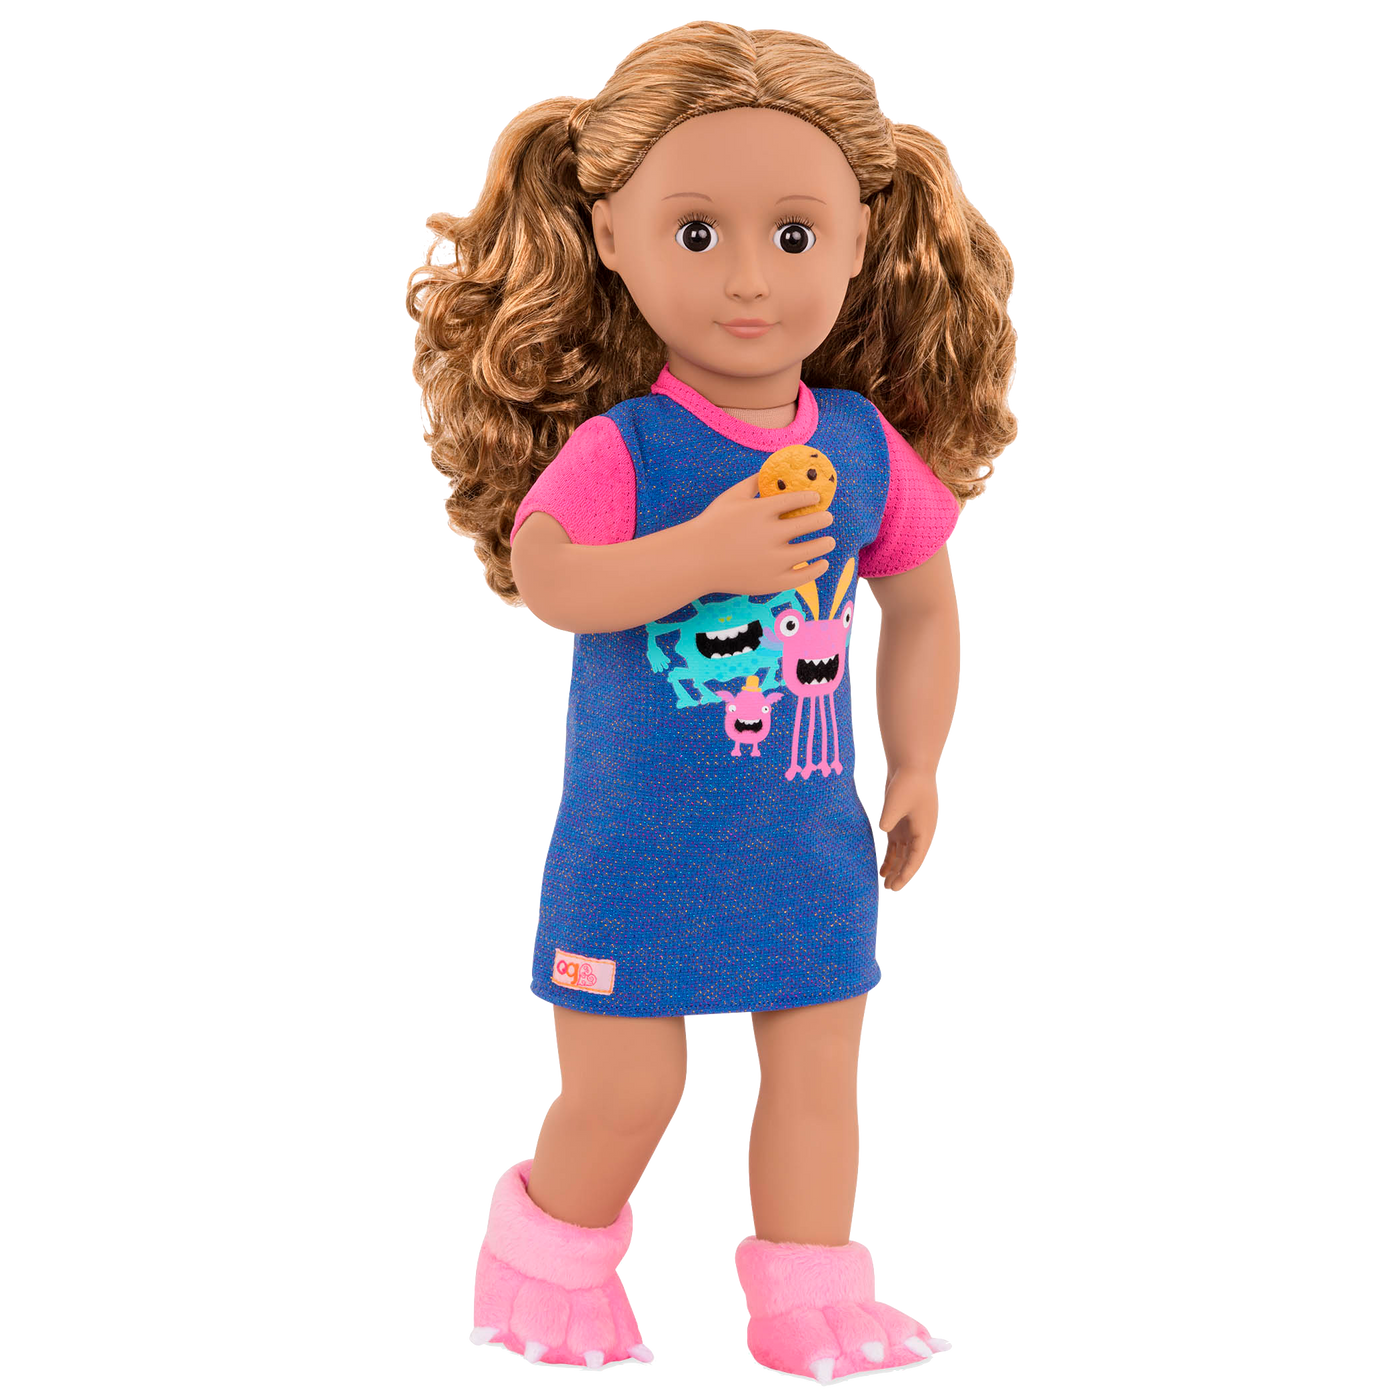 Snuggle Monster Pajama Outfit for 18-inch Dolls